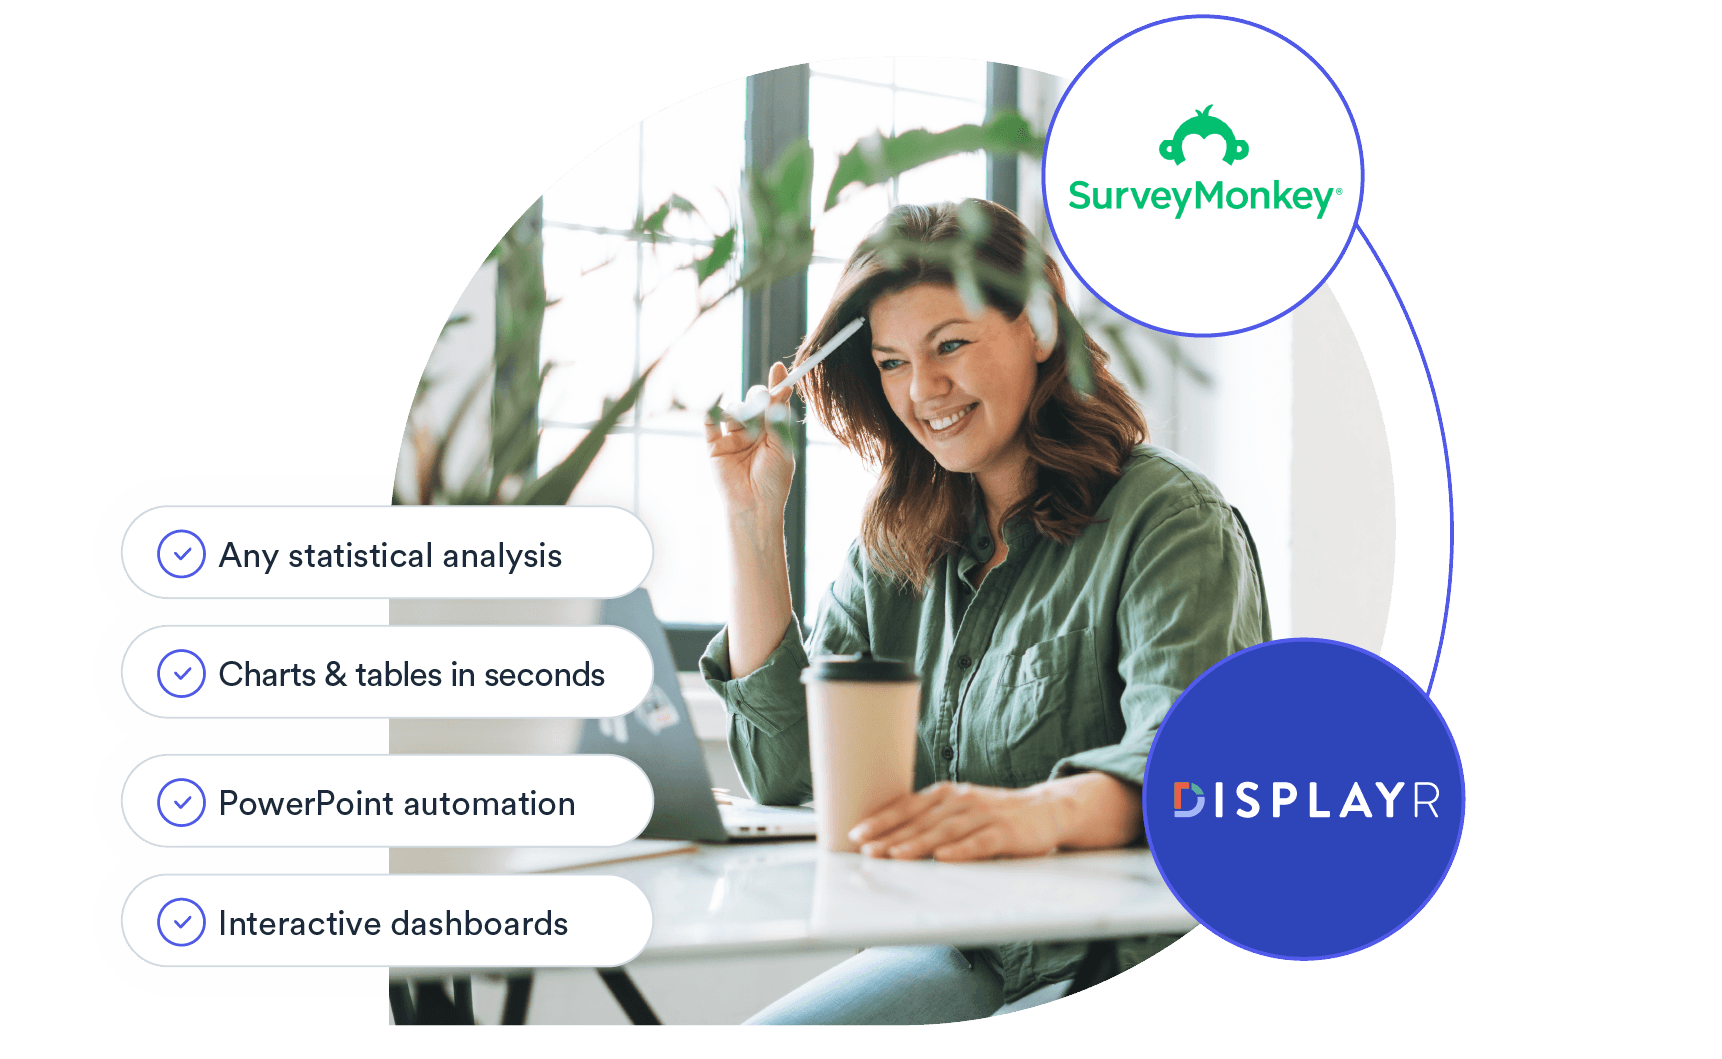 How to Check Respondent-level Data in Displayr